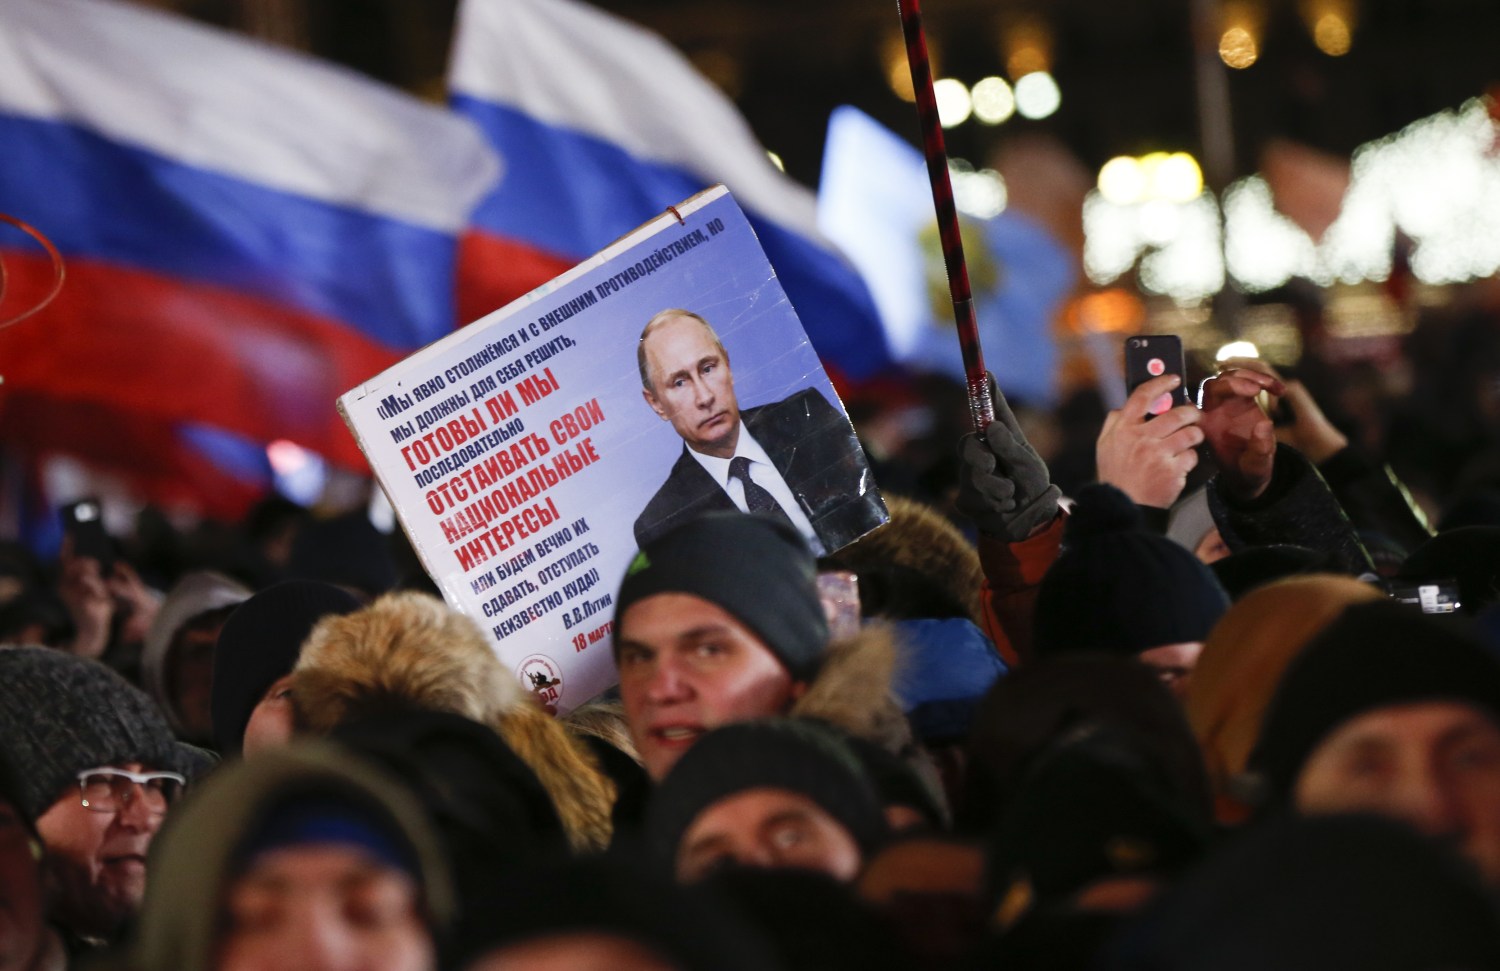 People attend a rally and concert marking the fourth anniversary of Russia's annexation of the Crimea region, at Manezhnaya Square in central Moscow